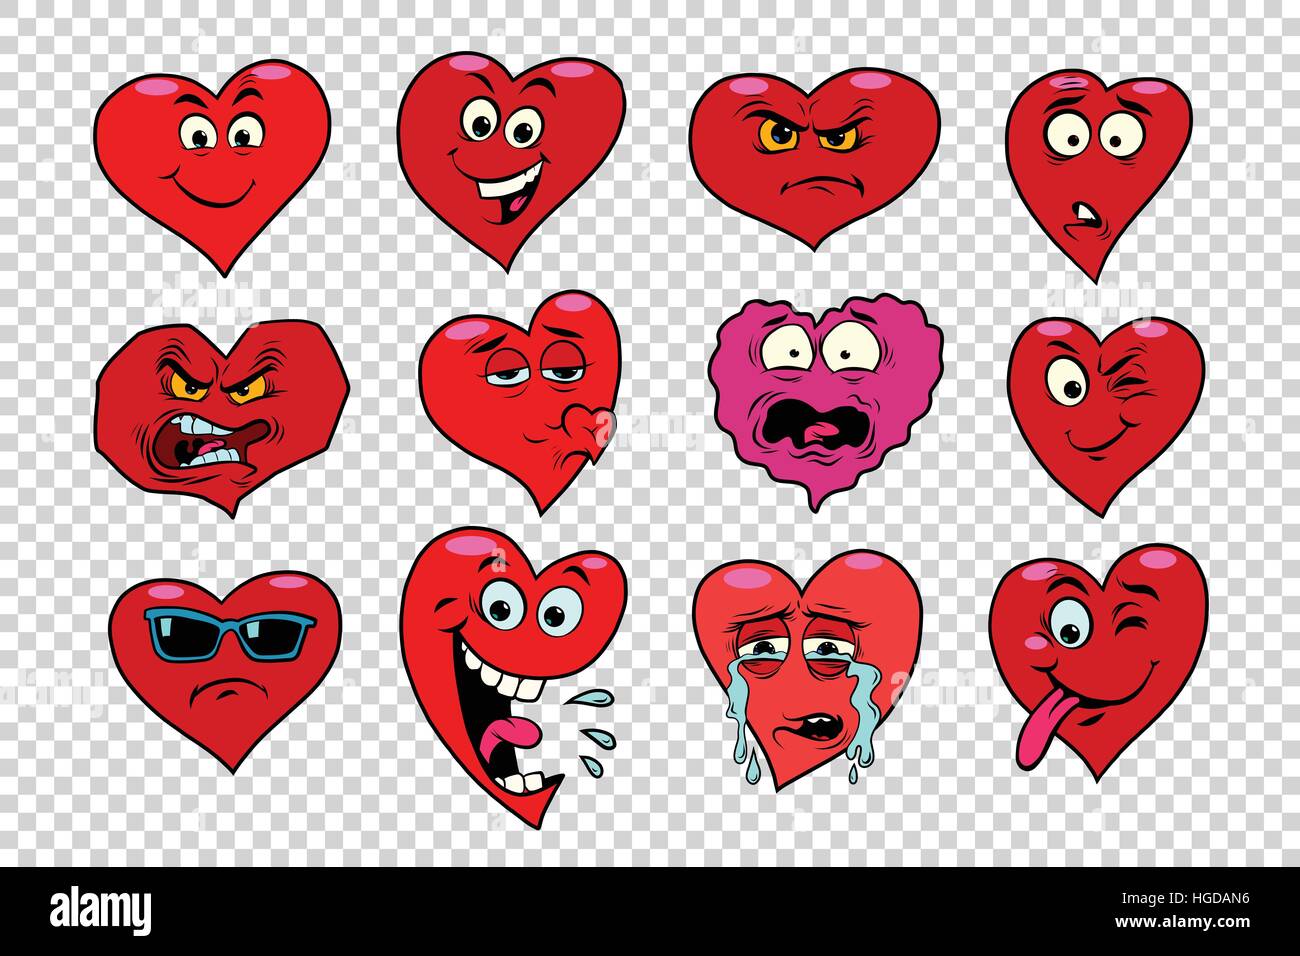 Red heart Valentine set of characters Stock Vector